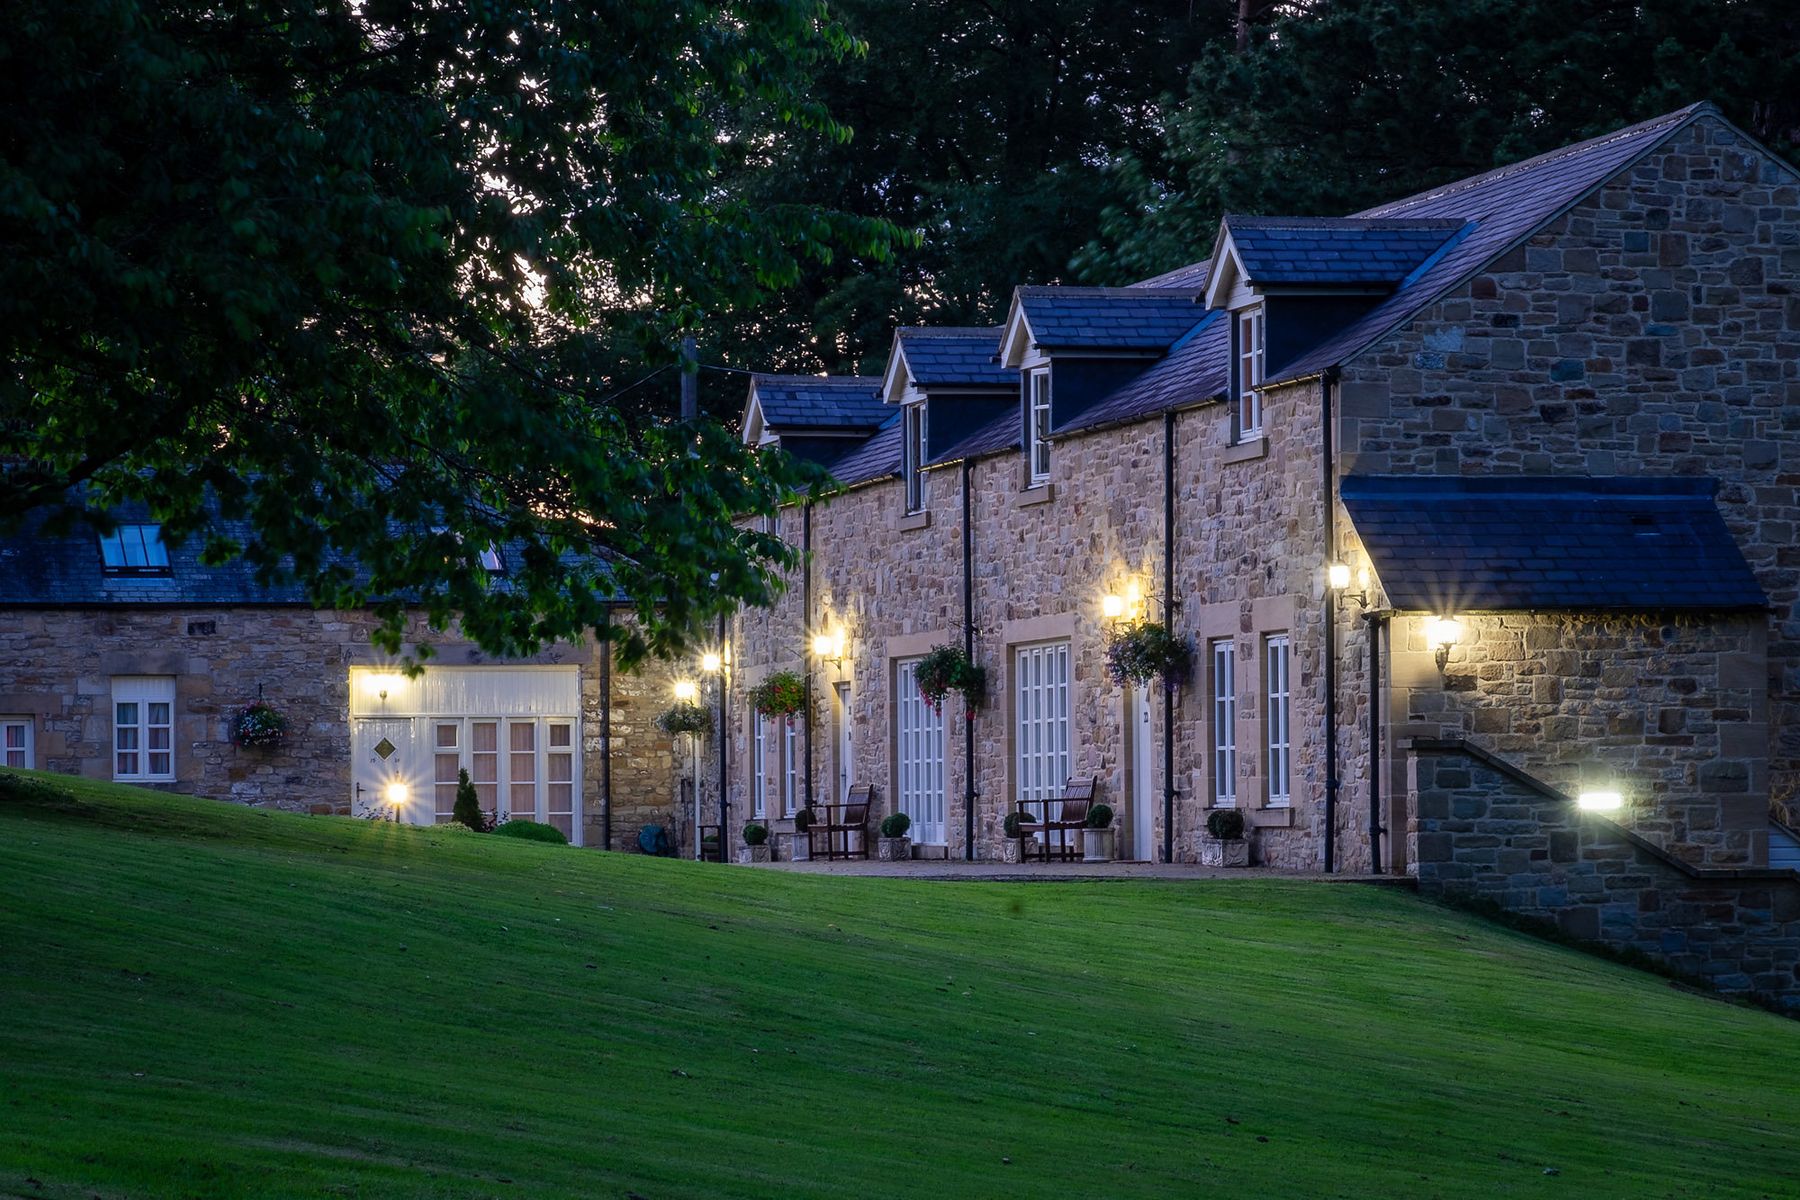 Castle View accommodation at Langley Castle Hotel, Northumberland, UK.